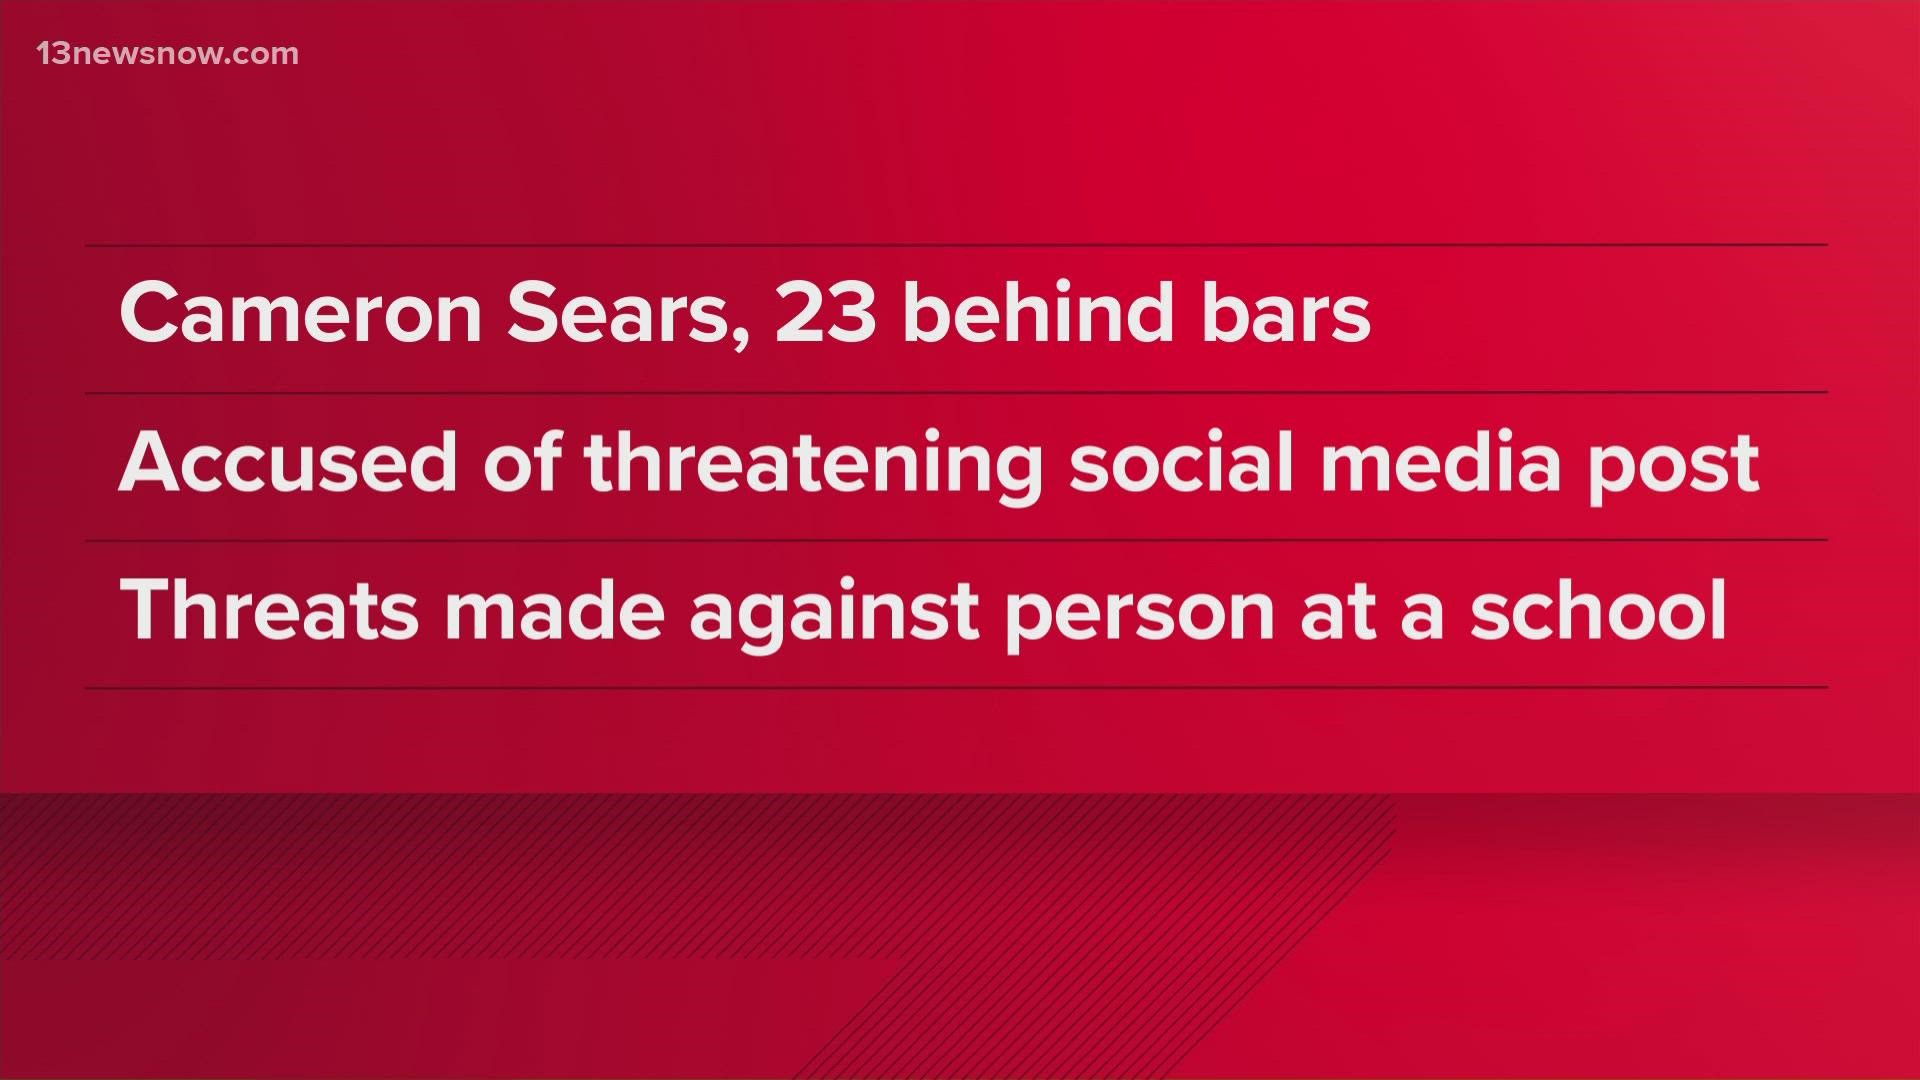 Police arrested Cameron Sears, 23, after an investigation into social media posts threatening violence against a school.